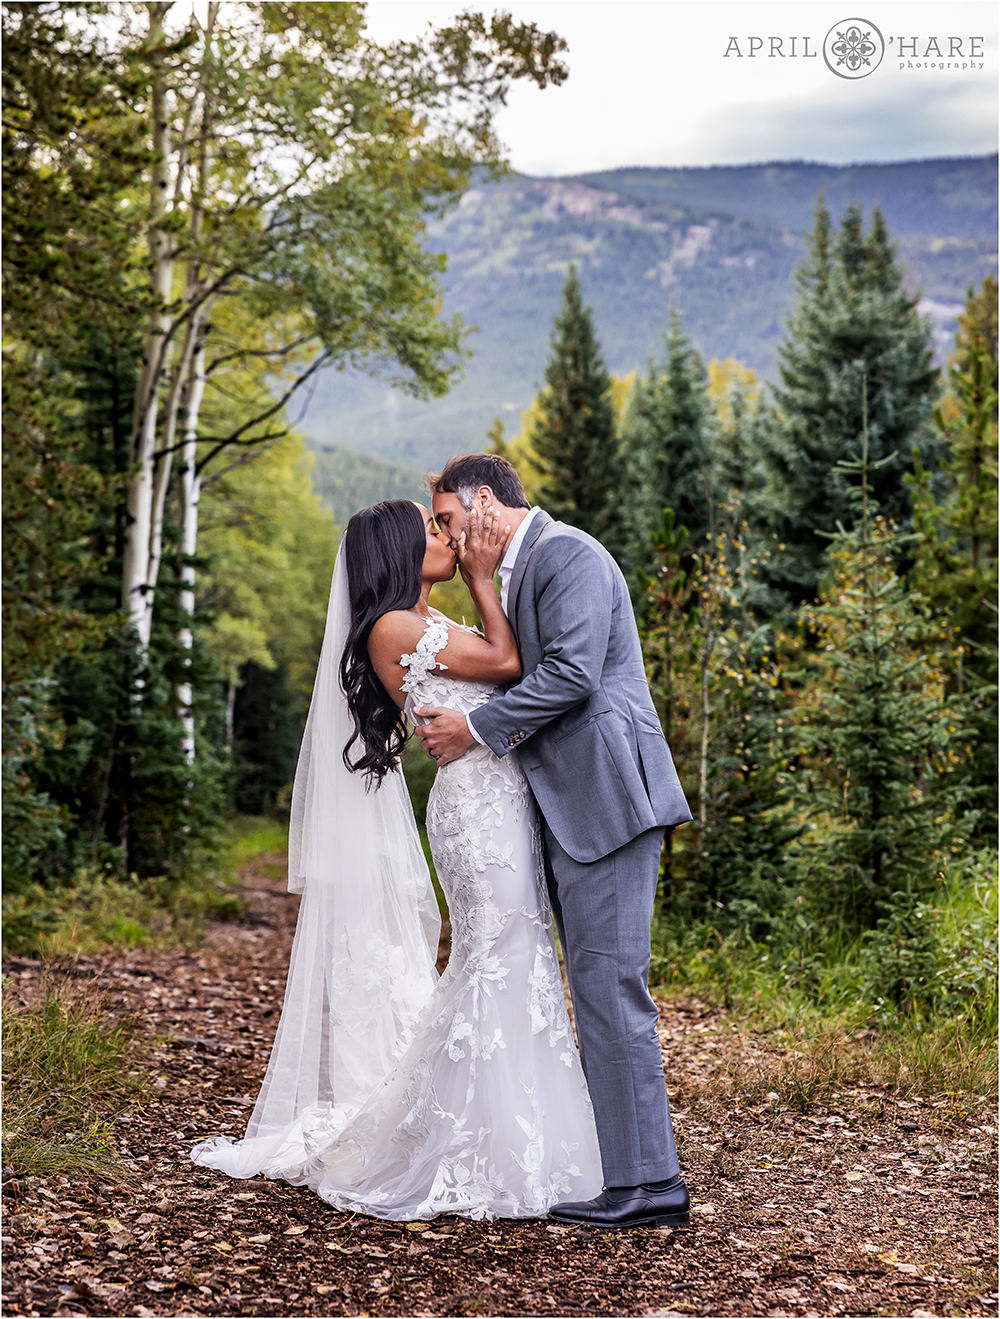 Couple kiss while wearing their beautiful wedding clothes in the woods of Evergreen Colorado